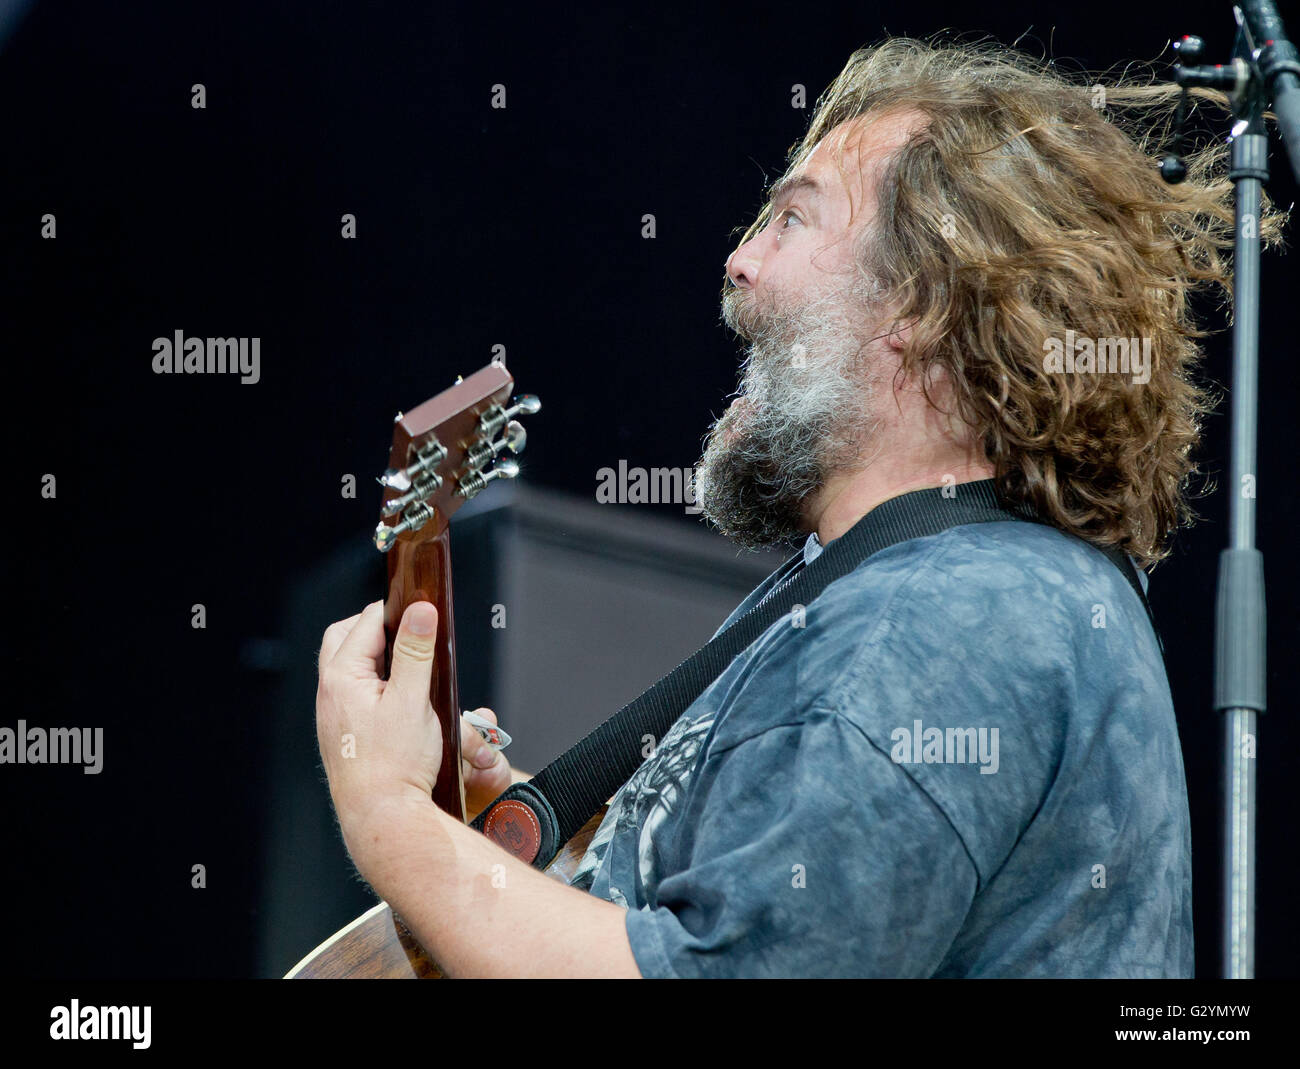 Nuremberg, Germany. 04th June, 2016. US singer and actor Jack Black of the band Tenacious D. performs on stage at the 'Rock im Park' (Rock in the Park) music festival in Nuremberg, Germany, 04 June 2016. More than 80 bands are set to perform at the festival until 05 June. Photo: DANIEL KARMANN/dpa/Alamy Live News Stock Photo